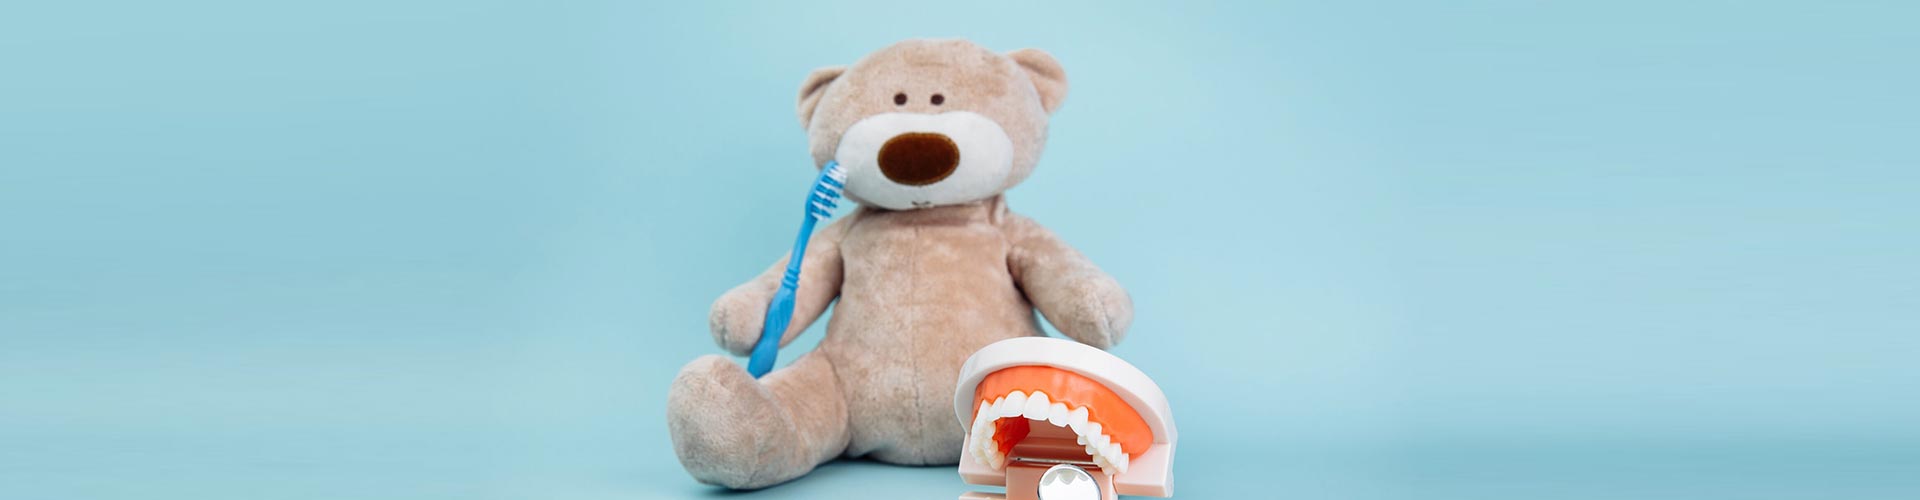 Stuffed Bear animal with toothbrush as a symbol of children dent